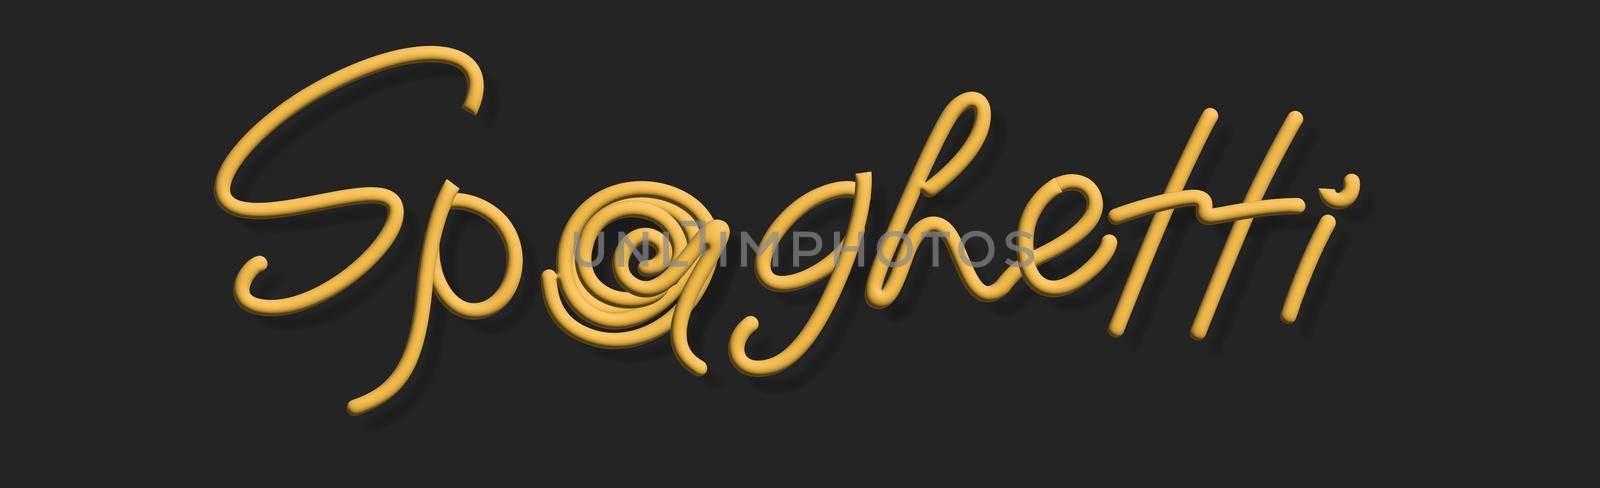 Text stylized written spaghetti. Stylish design for a brand, label or advertisement